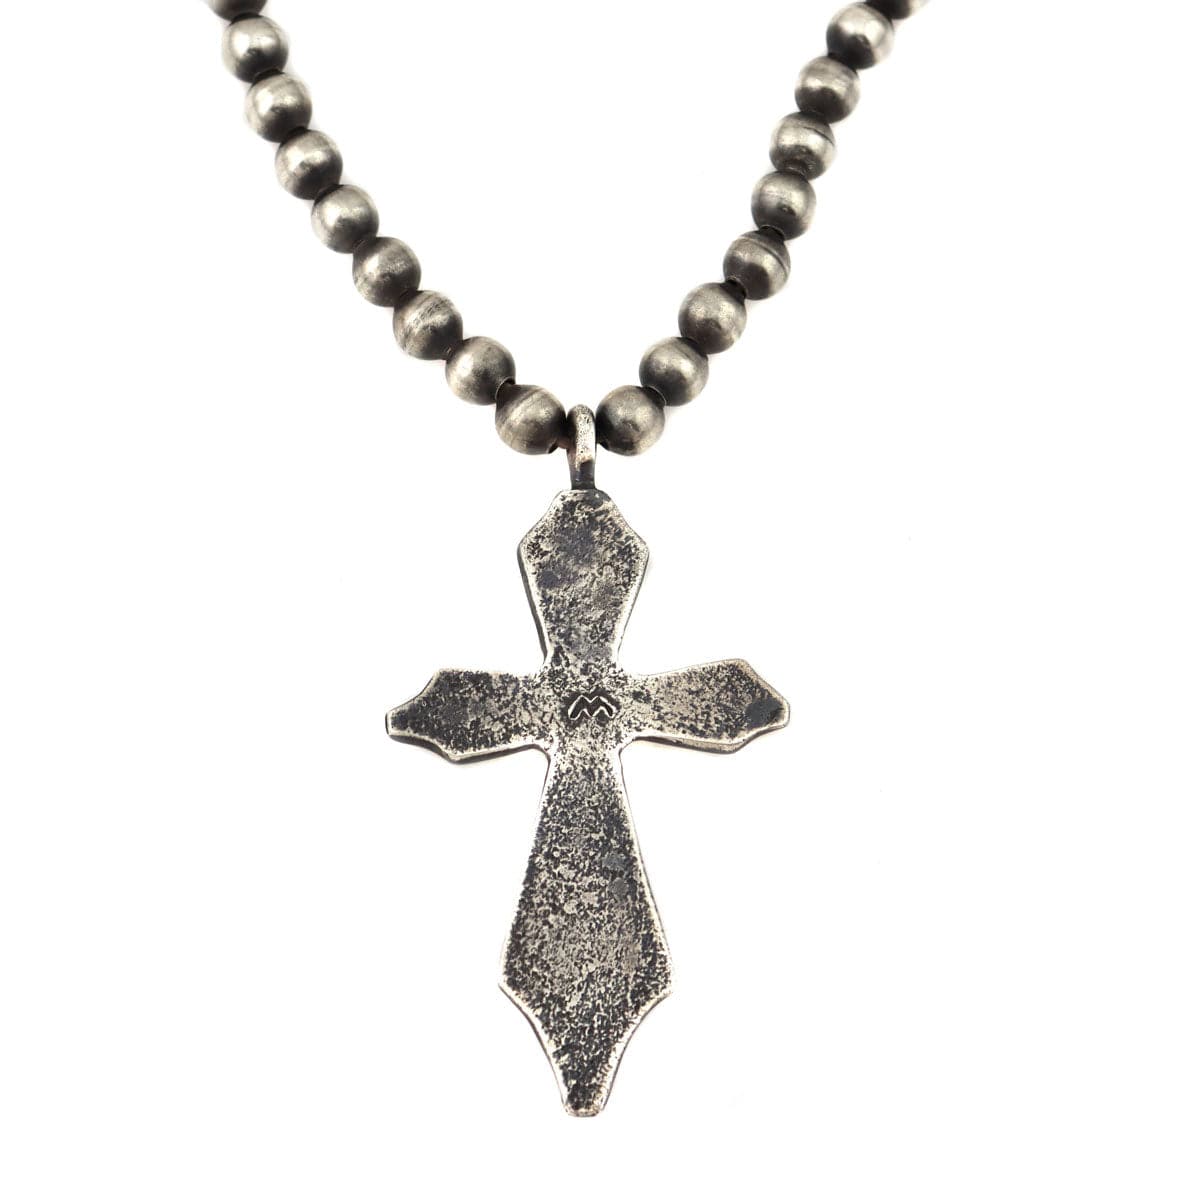 Miramontes - Old Style Necklace with Silver Beads and Sandcast Silver Cross Pendant (J91305-1221-034)3